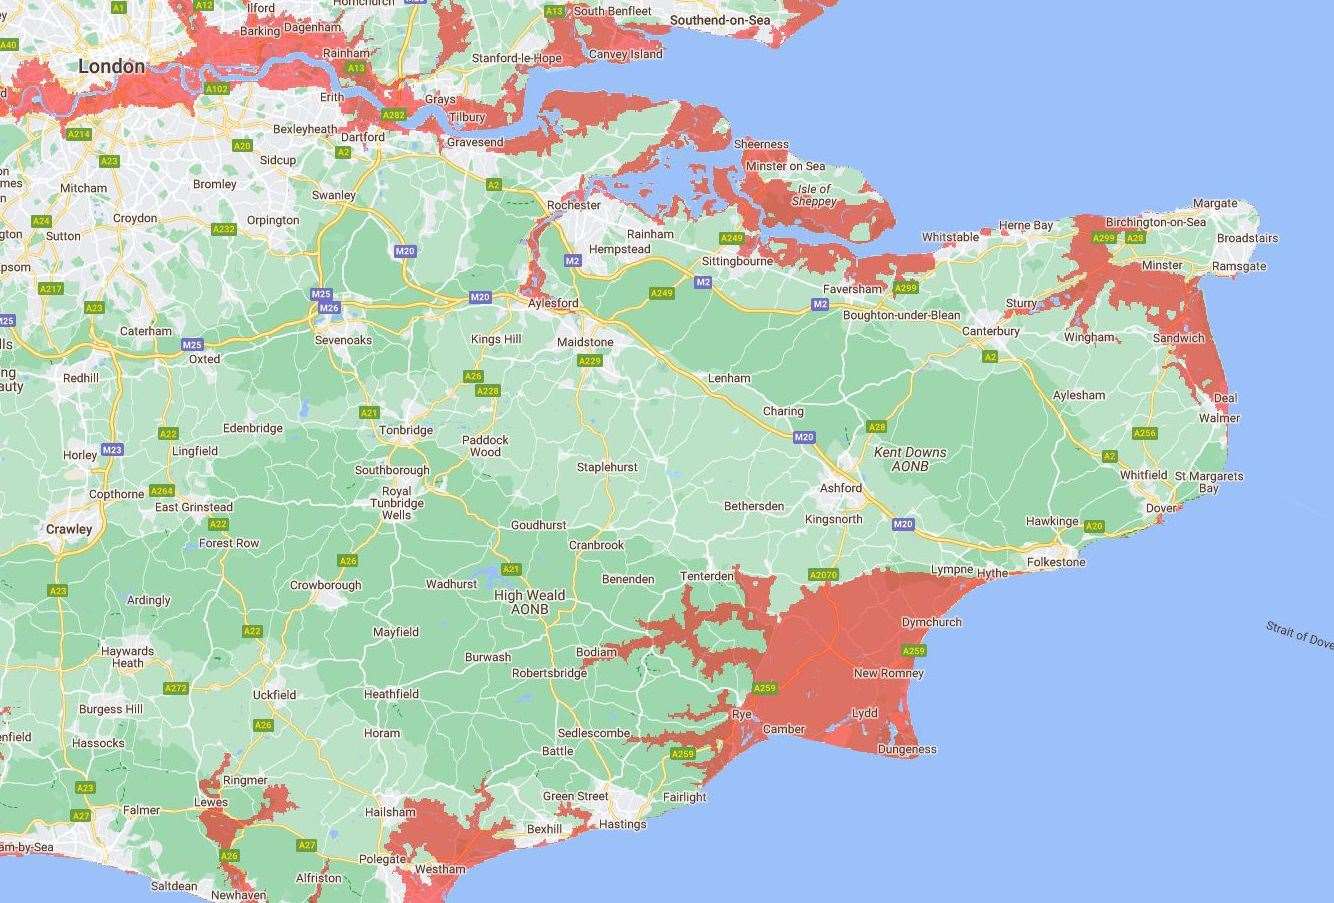 Climate Central's map depicting land at risk of flooding in Kent by 2050 if we continue on our current trajectory. The red is areas which will be prone to potentially severe flooding